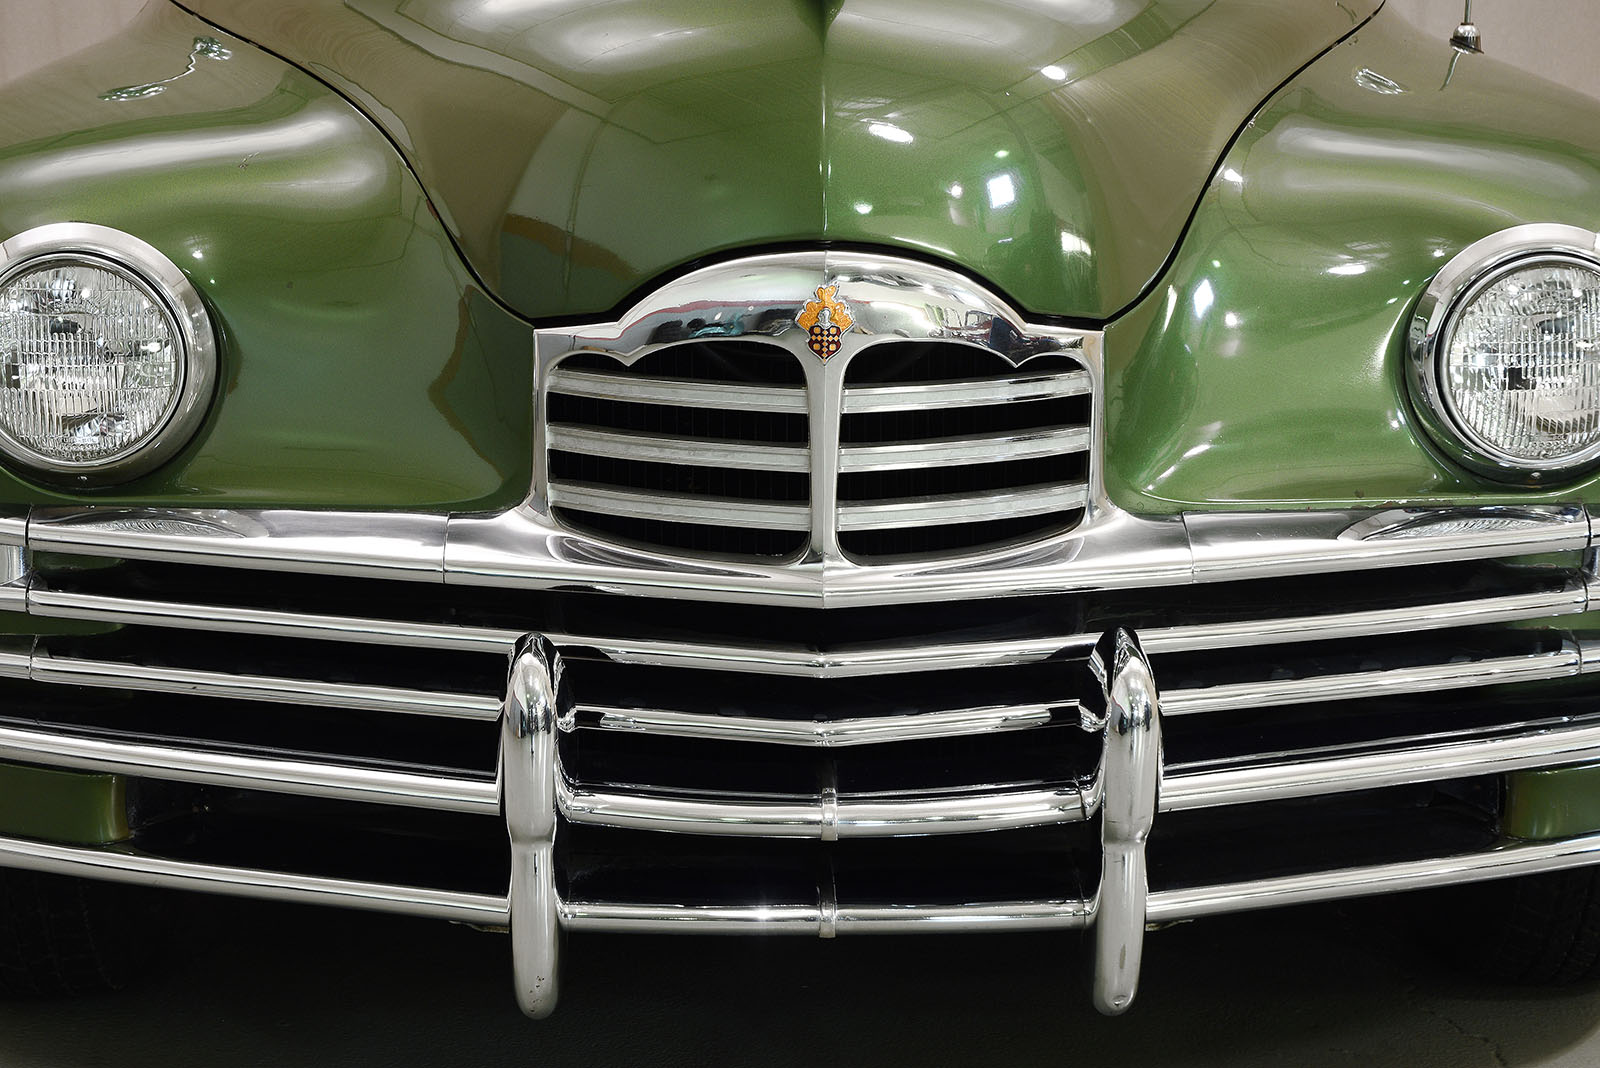 1949 packard eight deluxe-23rd series